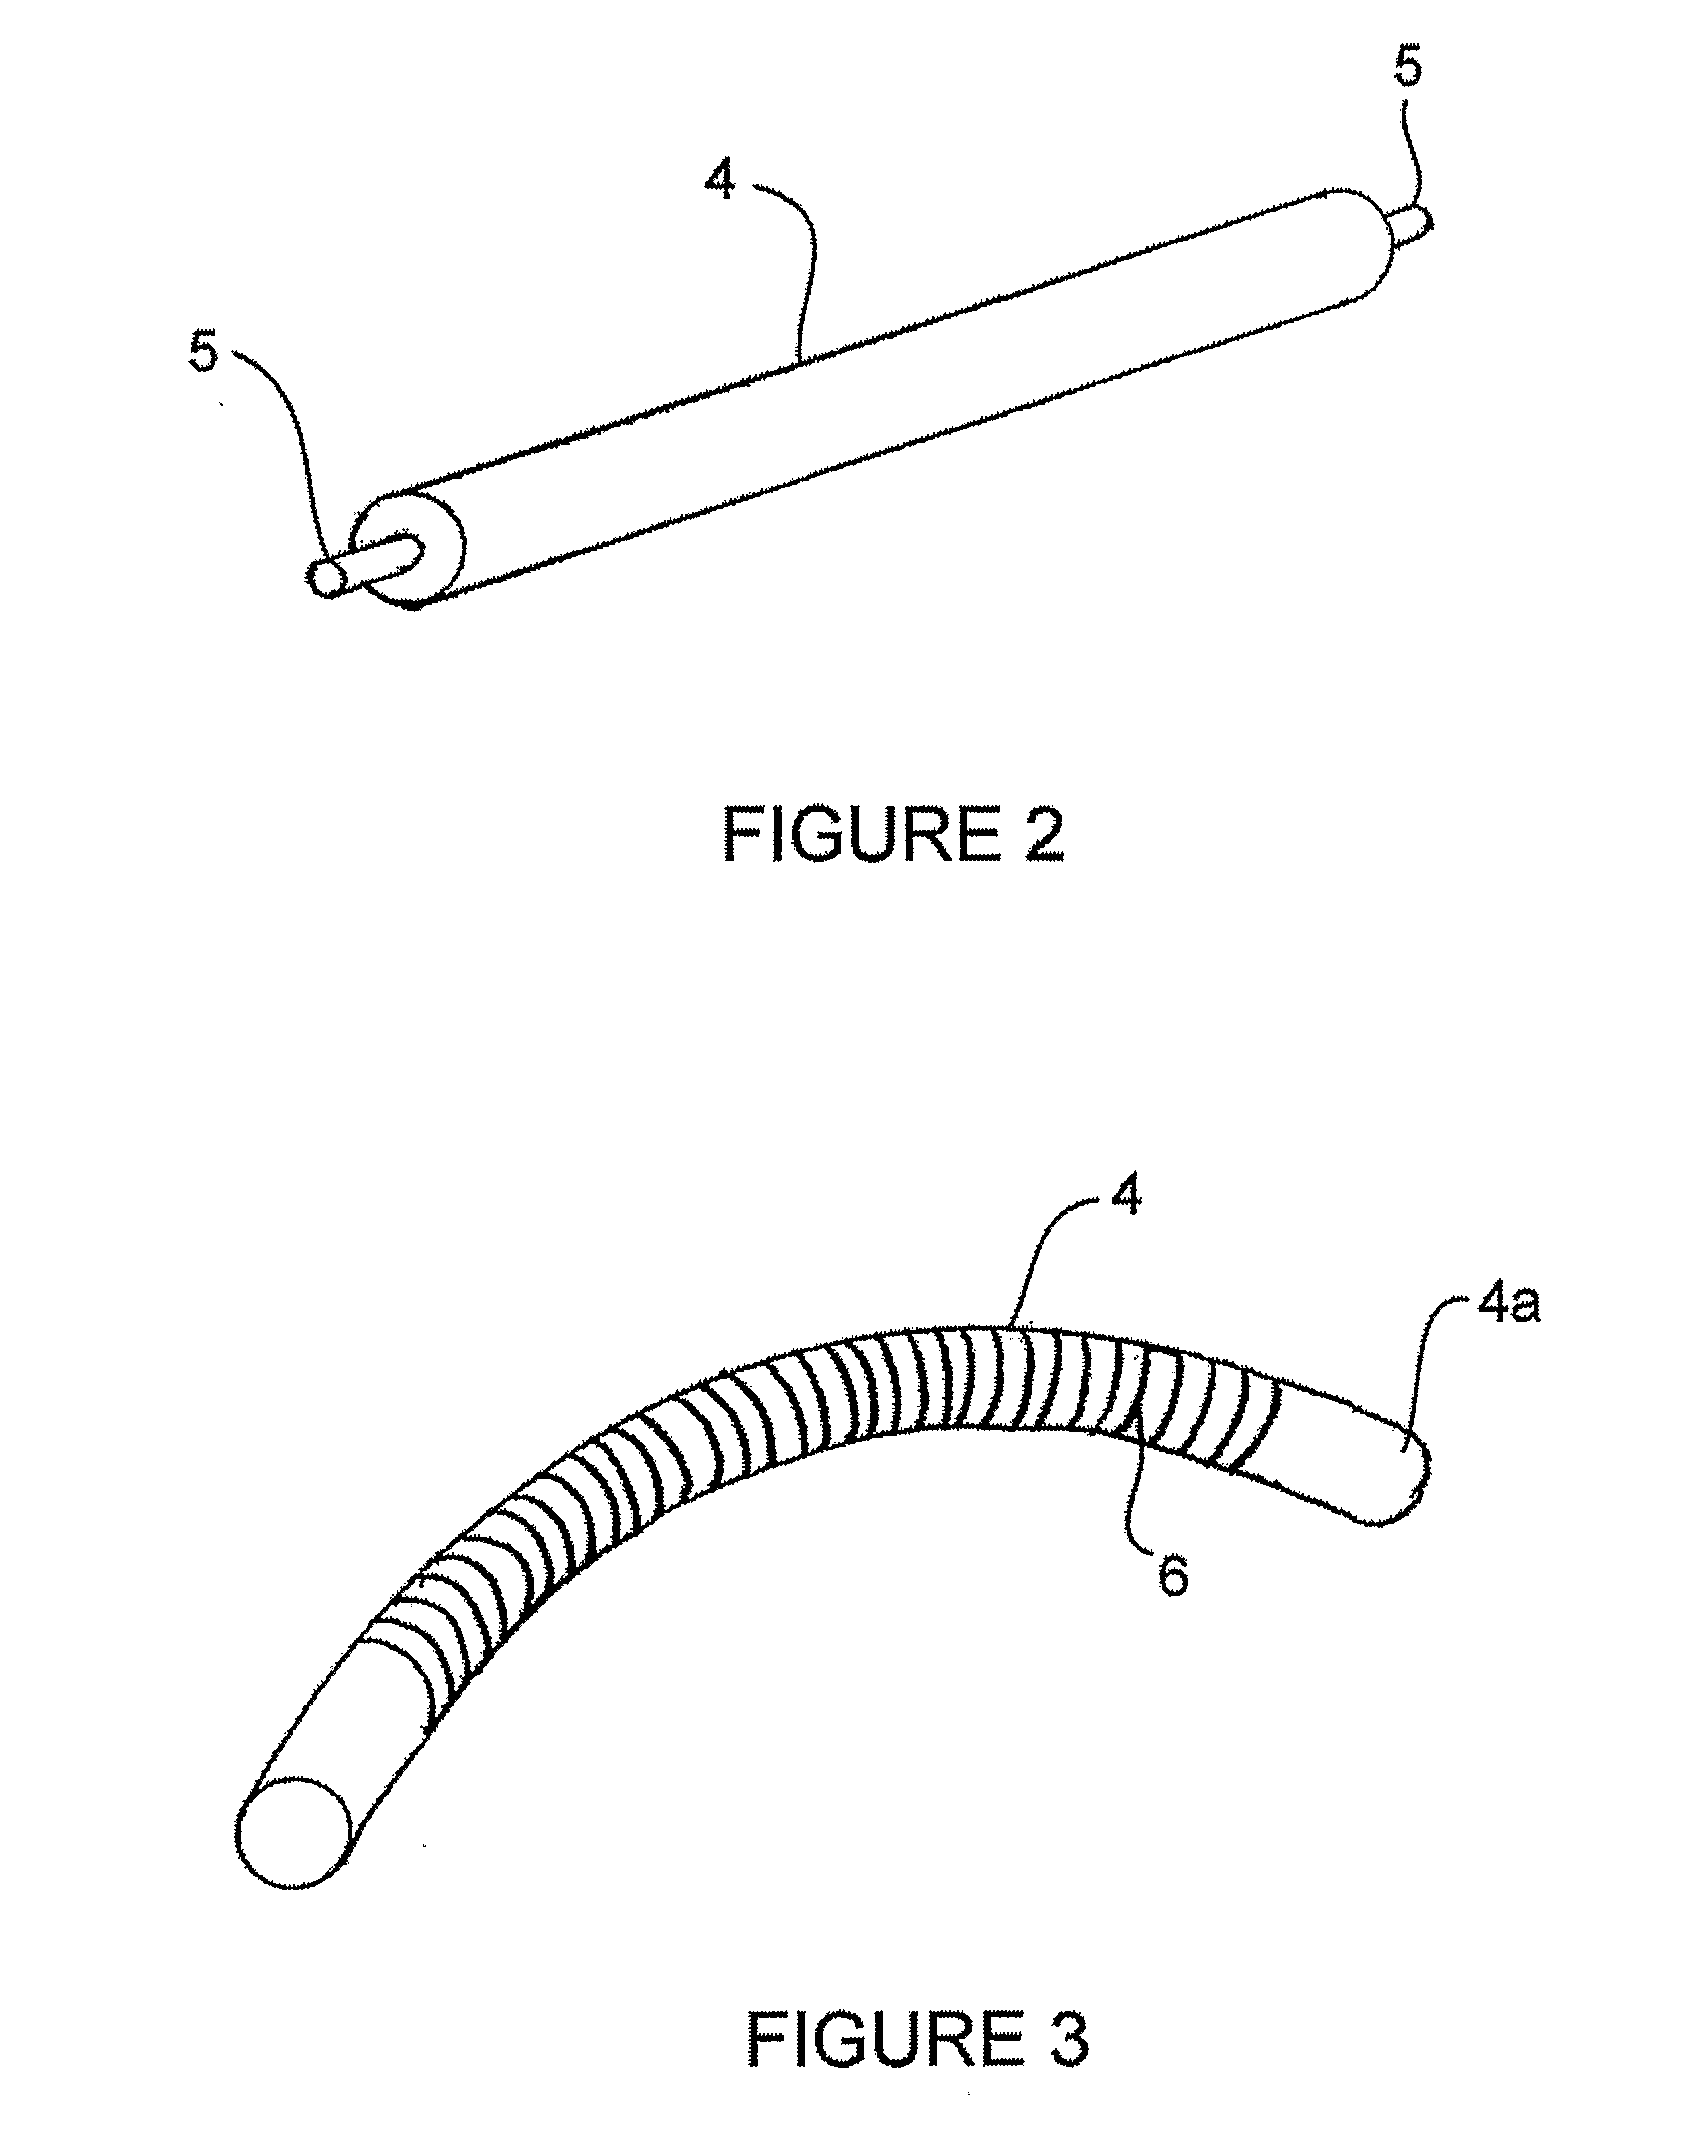 Methods for coating curved surfaces with a polarizing liquid